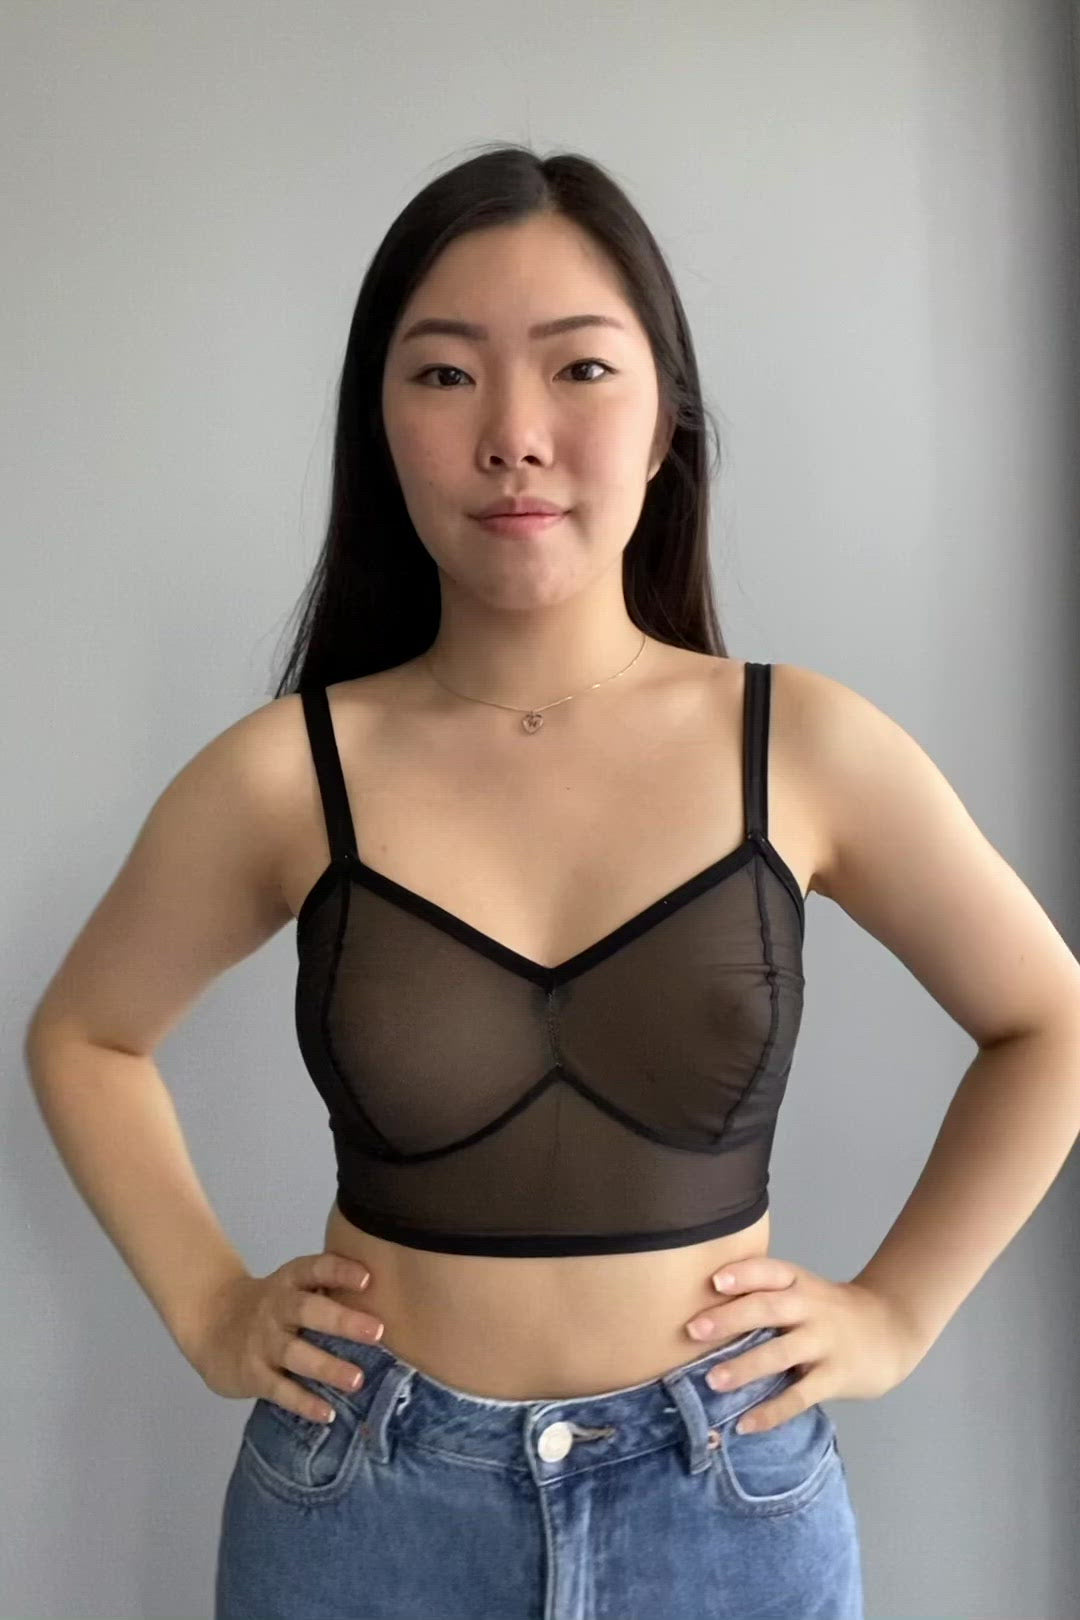 Custom Made Minimal Sheer Bra Made to Order, Wire Free, Full Coverage,  Supportive Comfortable, Everyday Wear, Gift for Her -  Australia